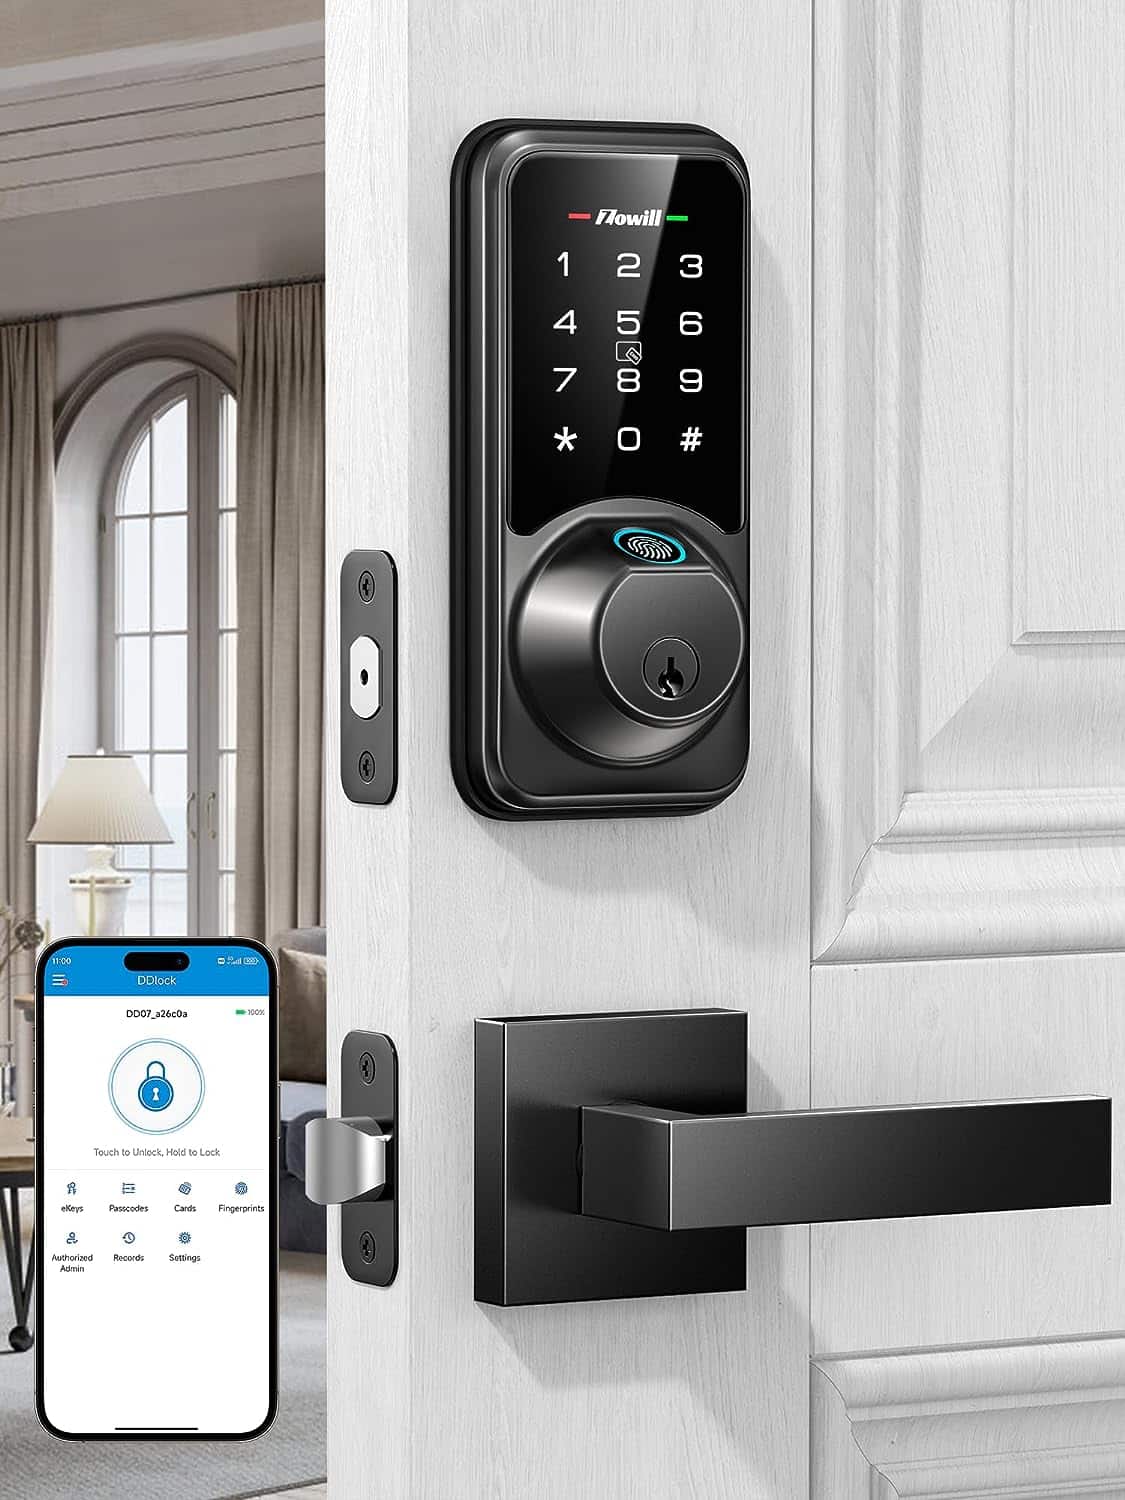 Zowill Smart Door Lock Set Review: The Ultimate Keyless Security Solution